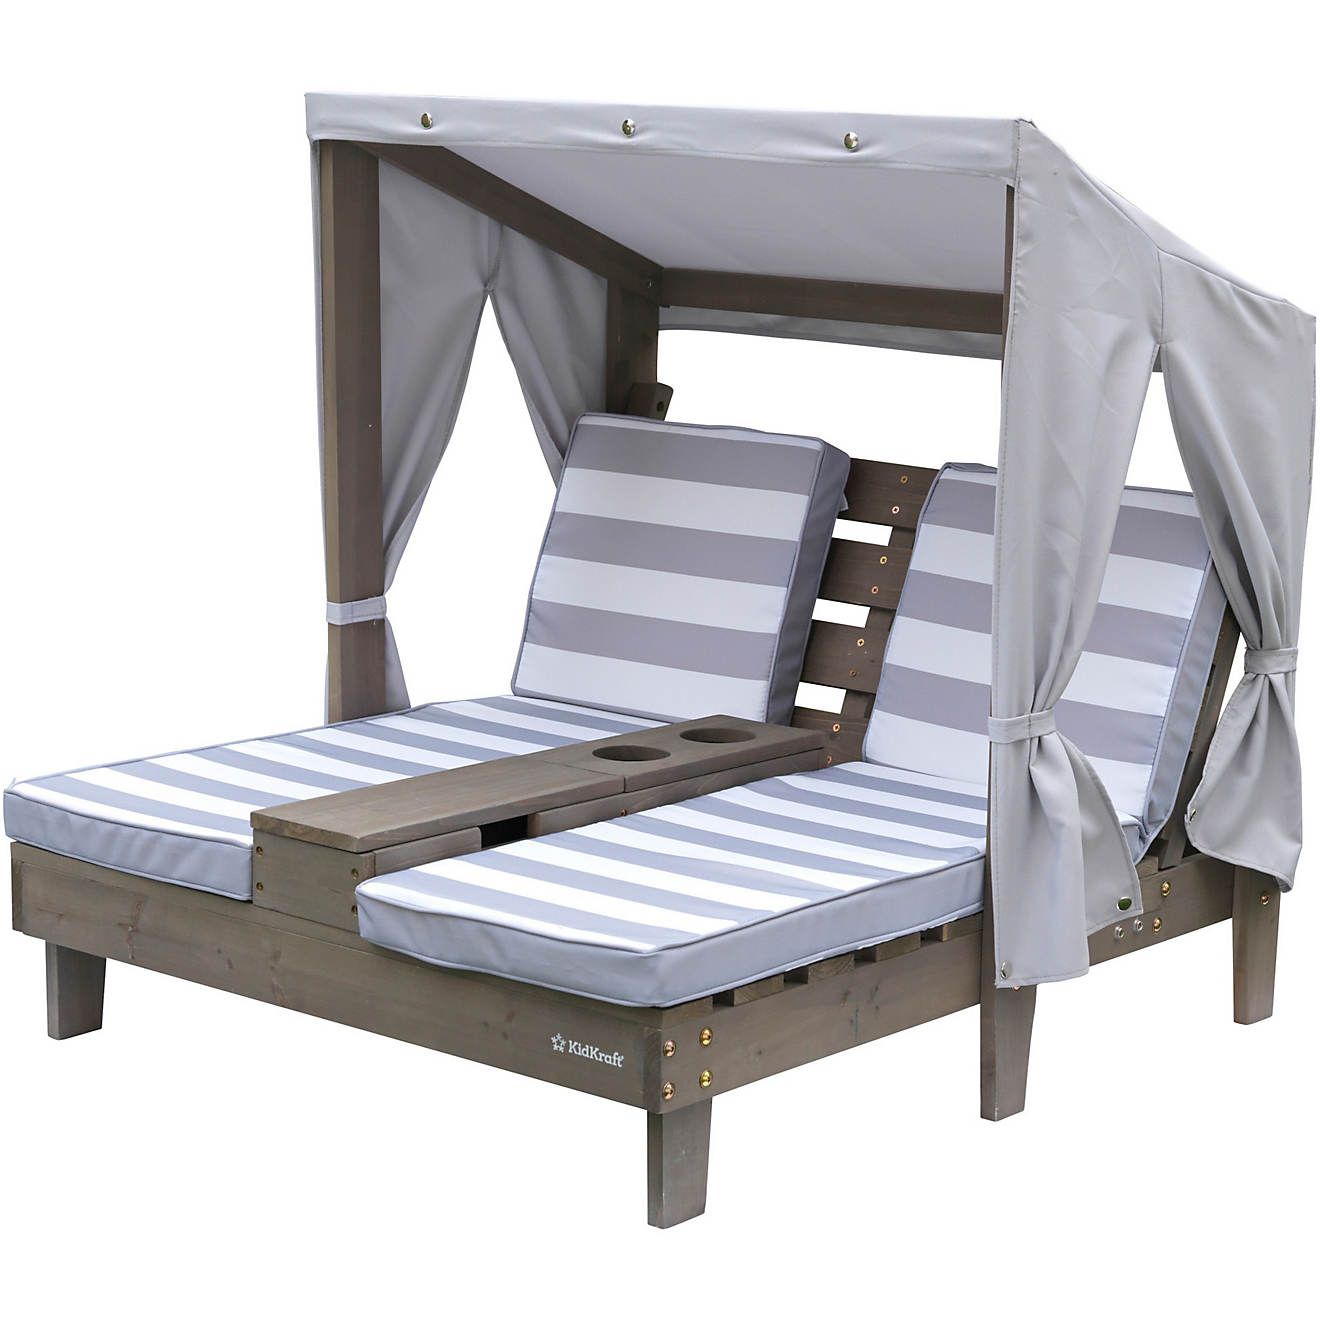 KidKraft Double Chaise Lounge with Cup Holders | Academy Sports + Outdoors